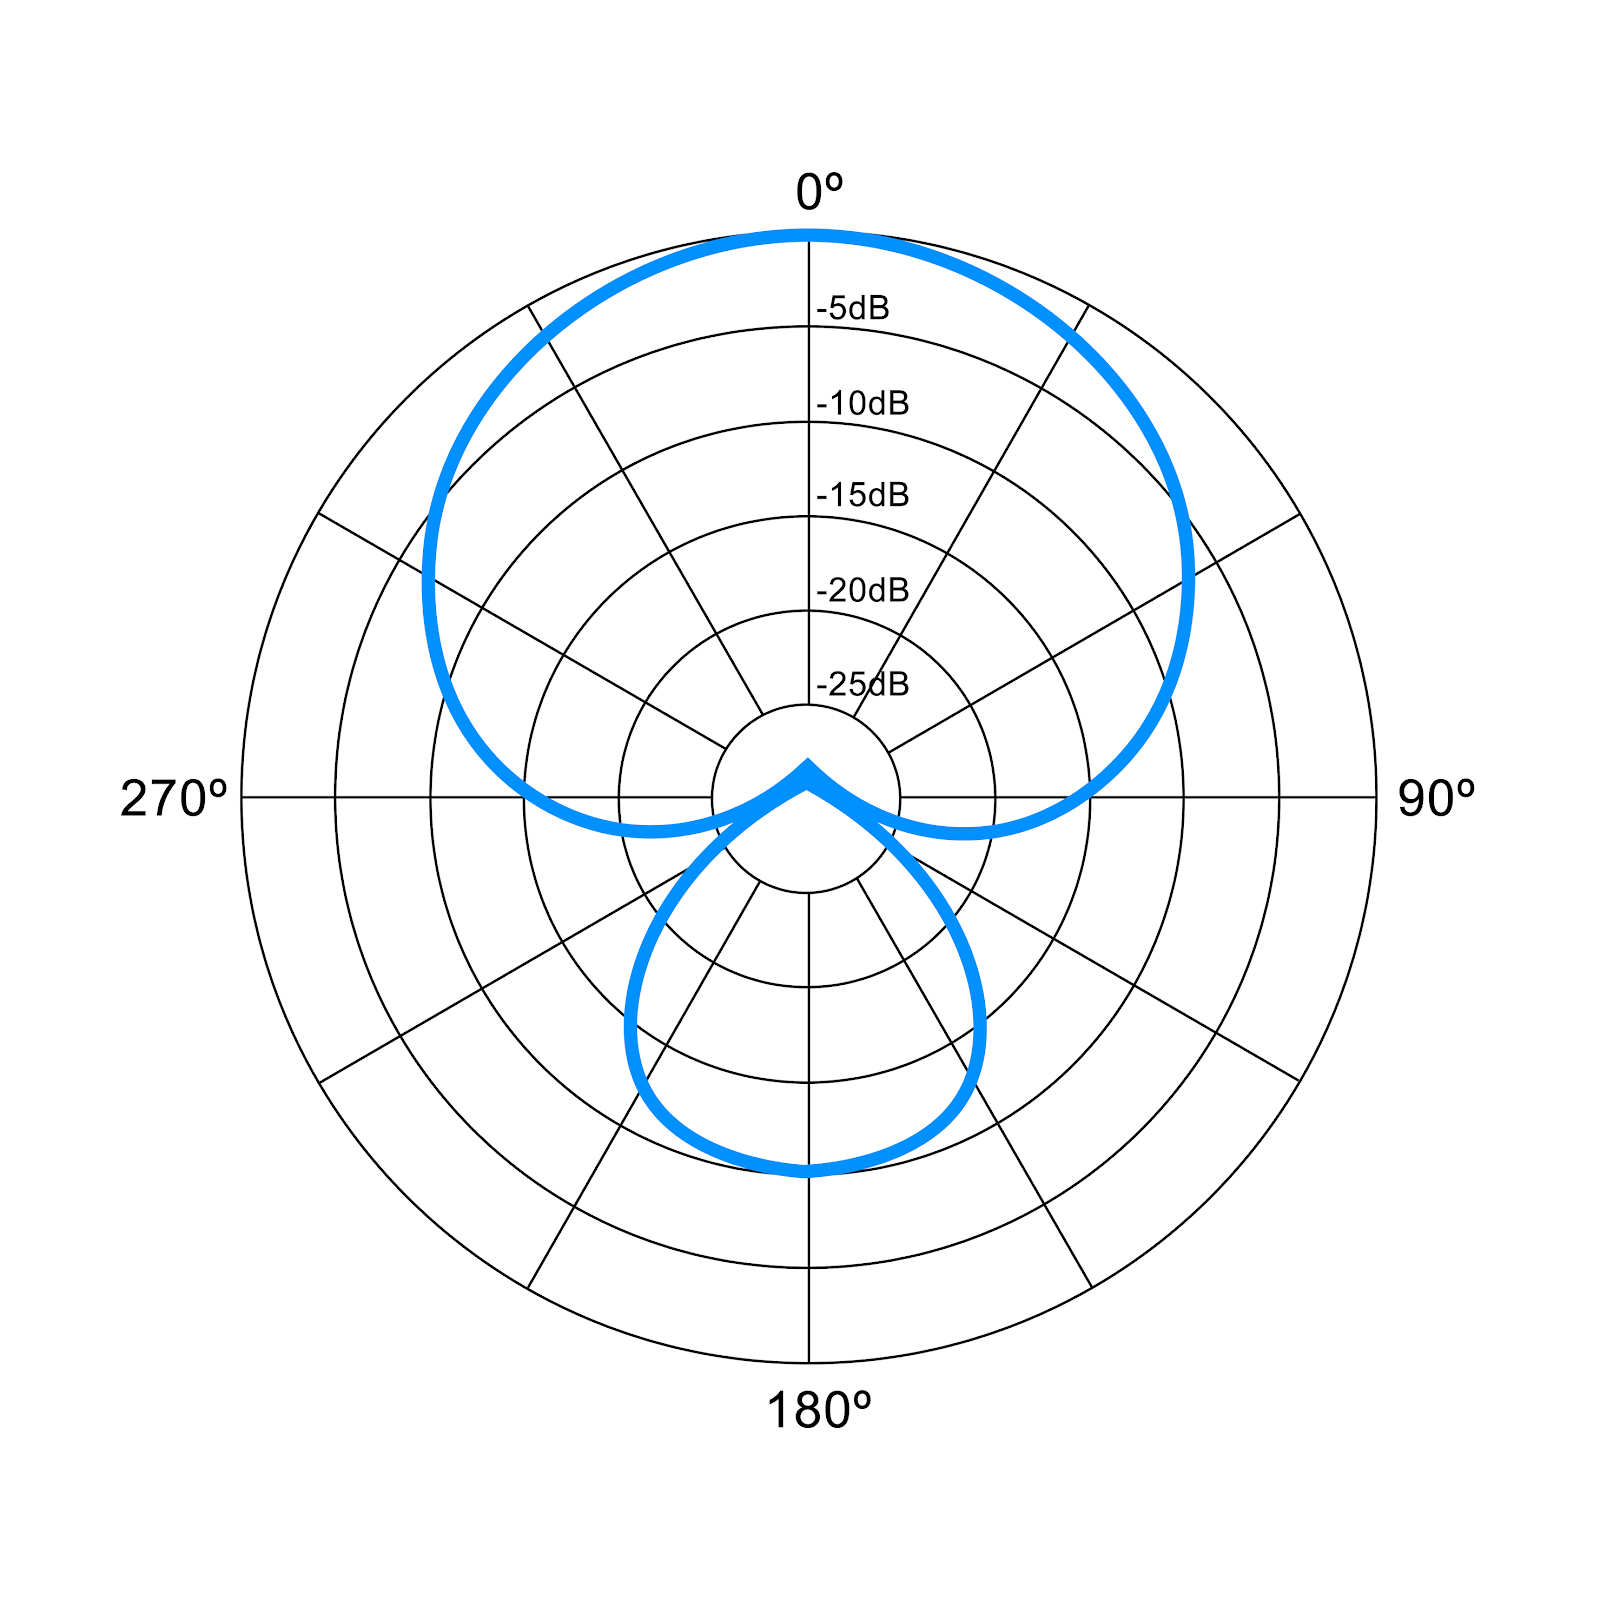 A polar chart of a super cardioid directional microphone.